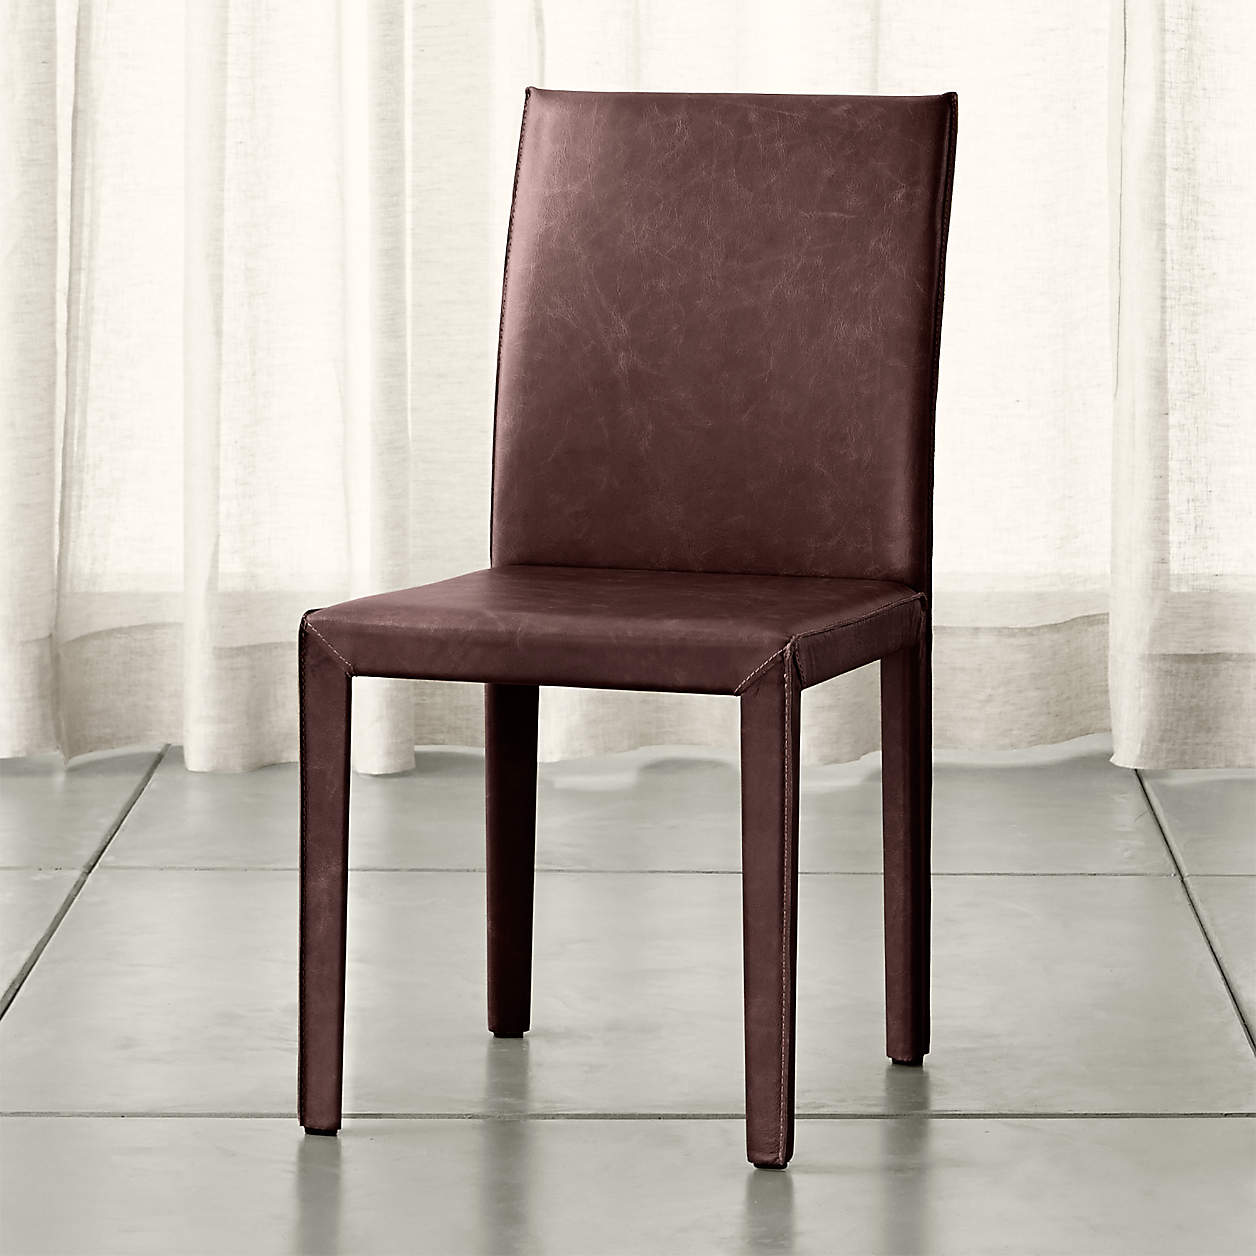 Folio Merlot TopGrain Leather Dining Chair + Reviews